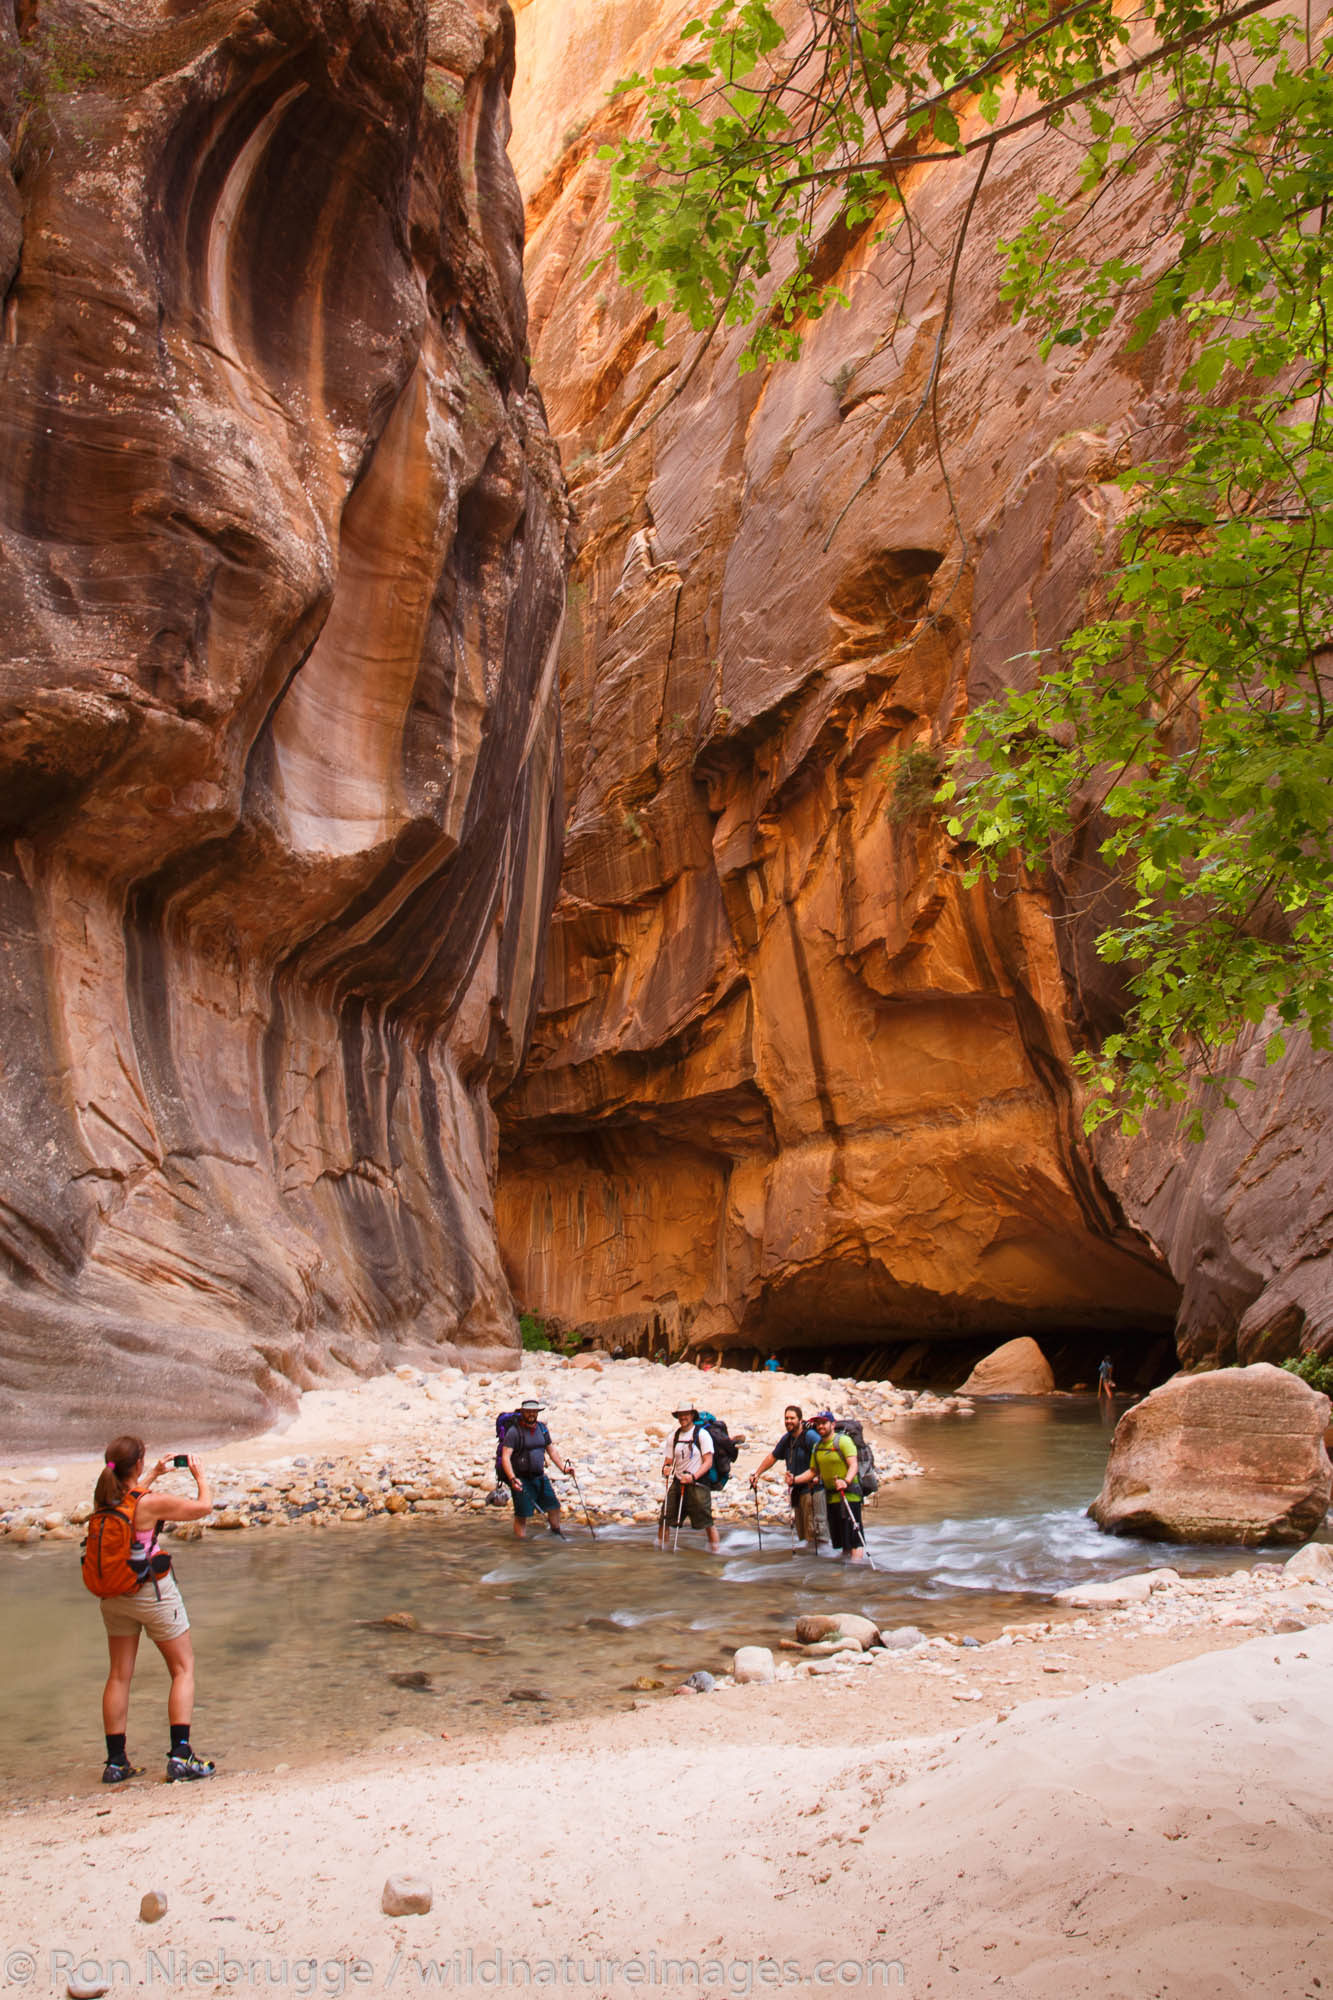 Hikers in The Narrows on the Virgin River, Zion National Park, Utah.